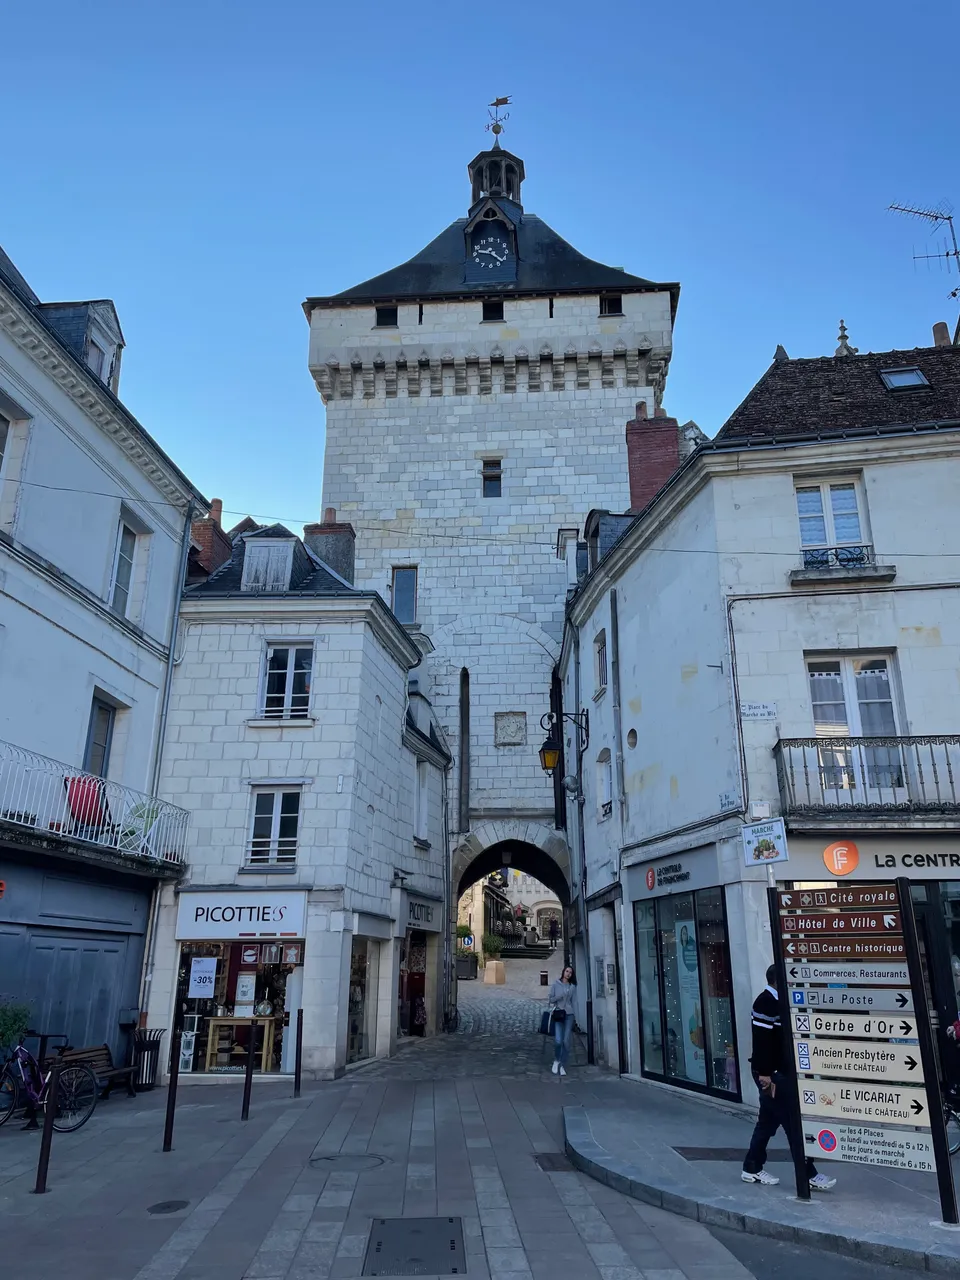 One of the gates to the fortified Royal City of Loches